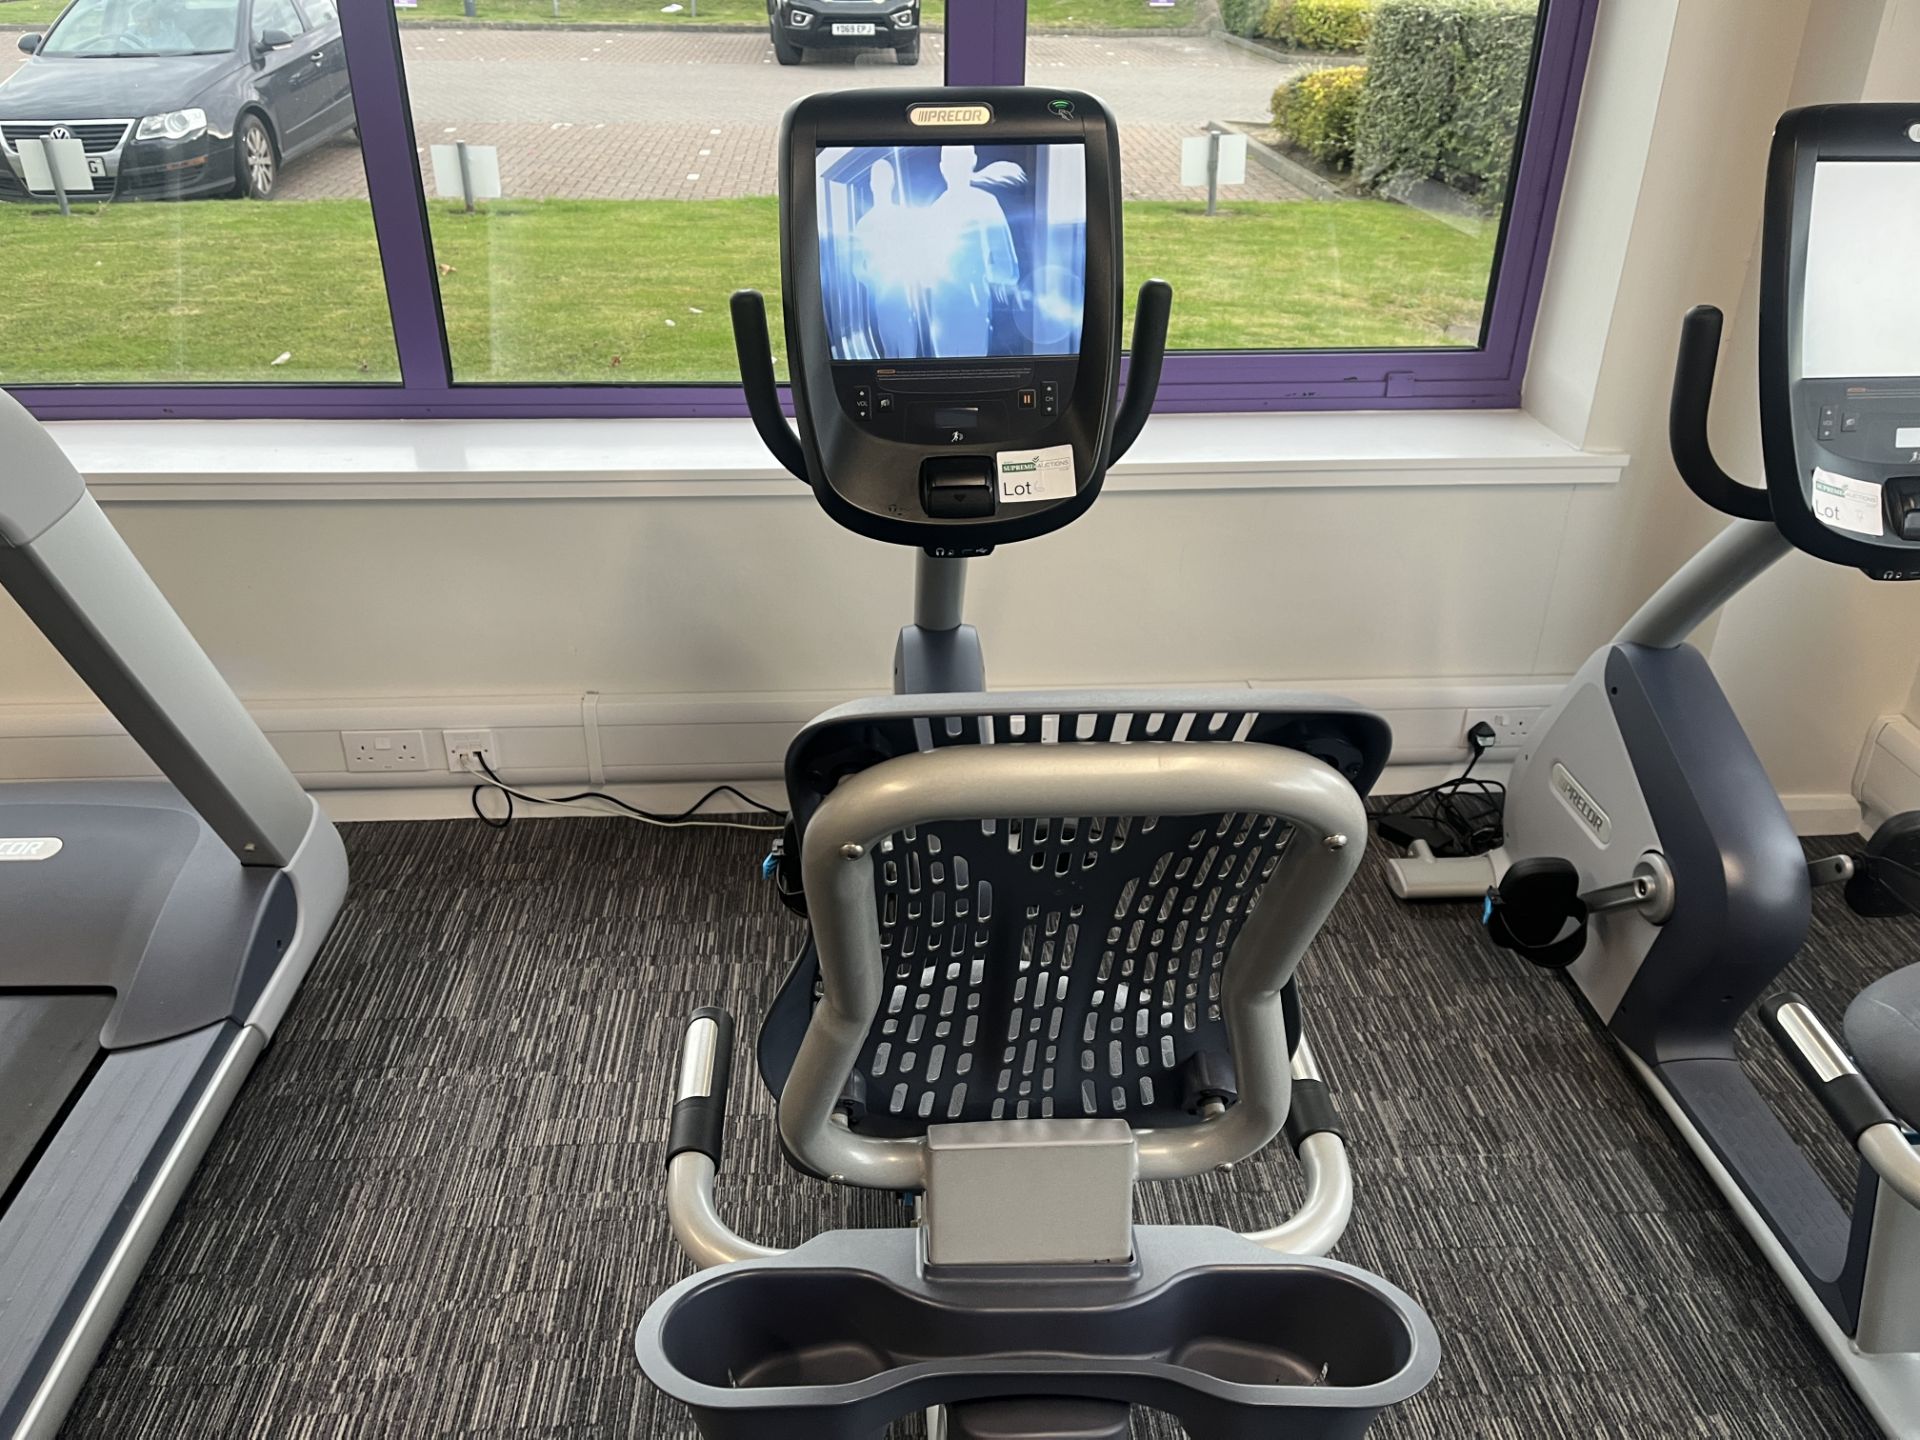 PRECOR 885 RECUMBENT BIKE WITH P82 CONSOLE DISPLAY - Image 2 of 2